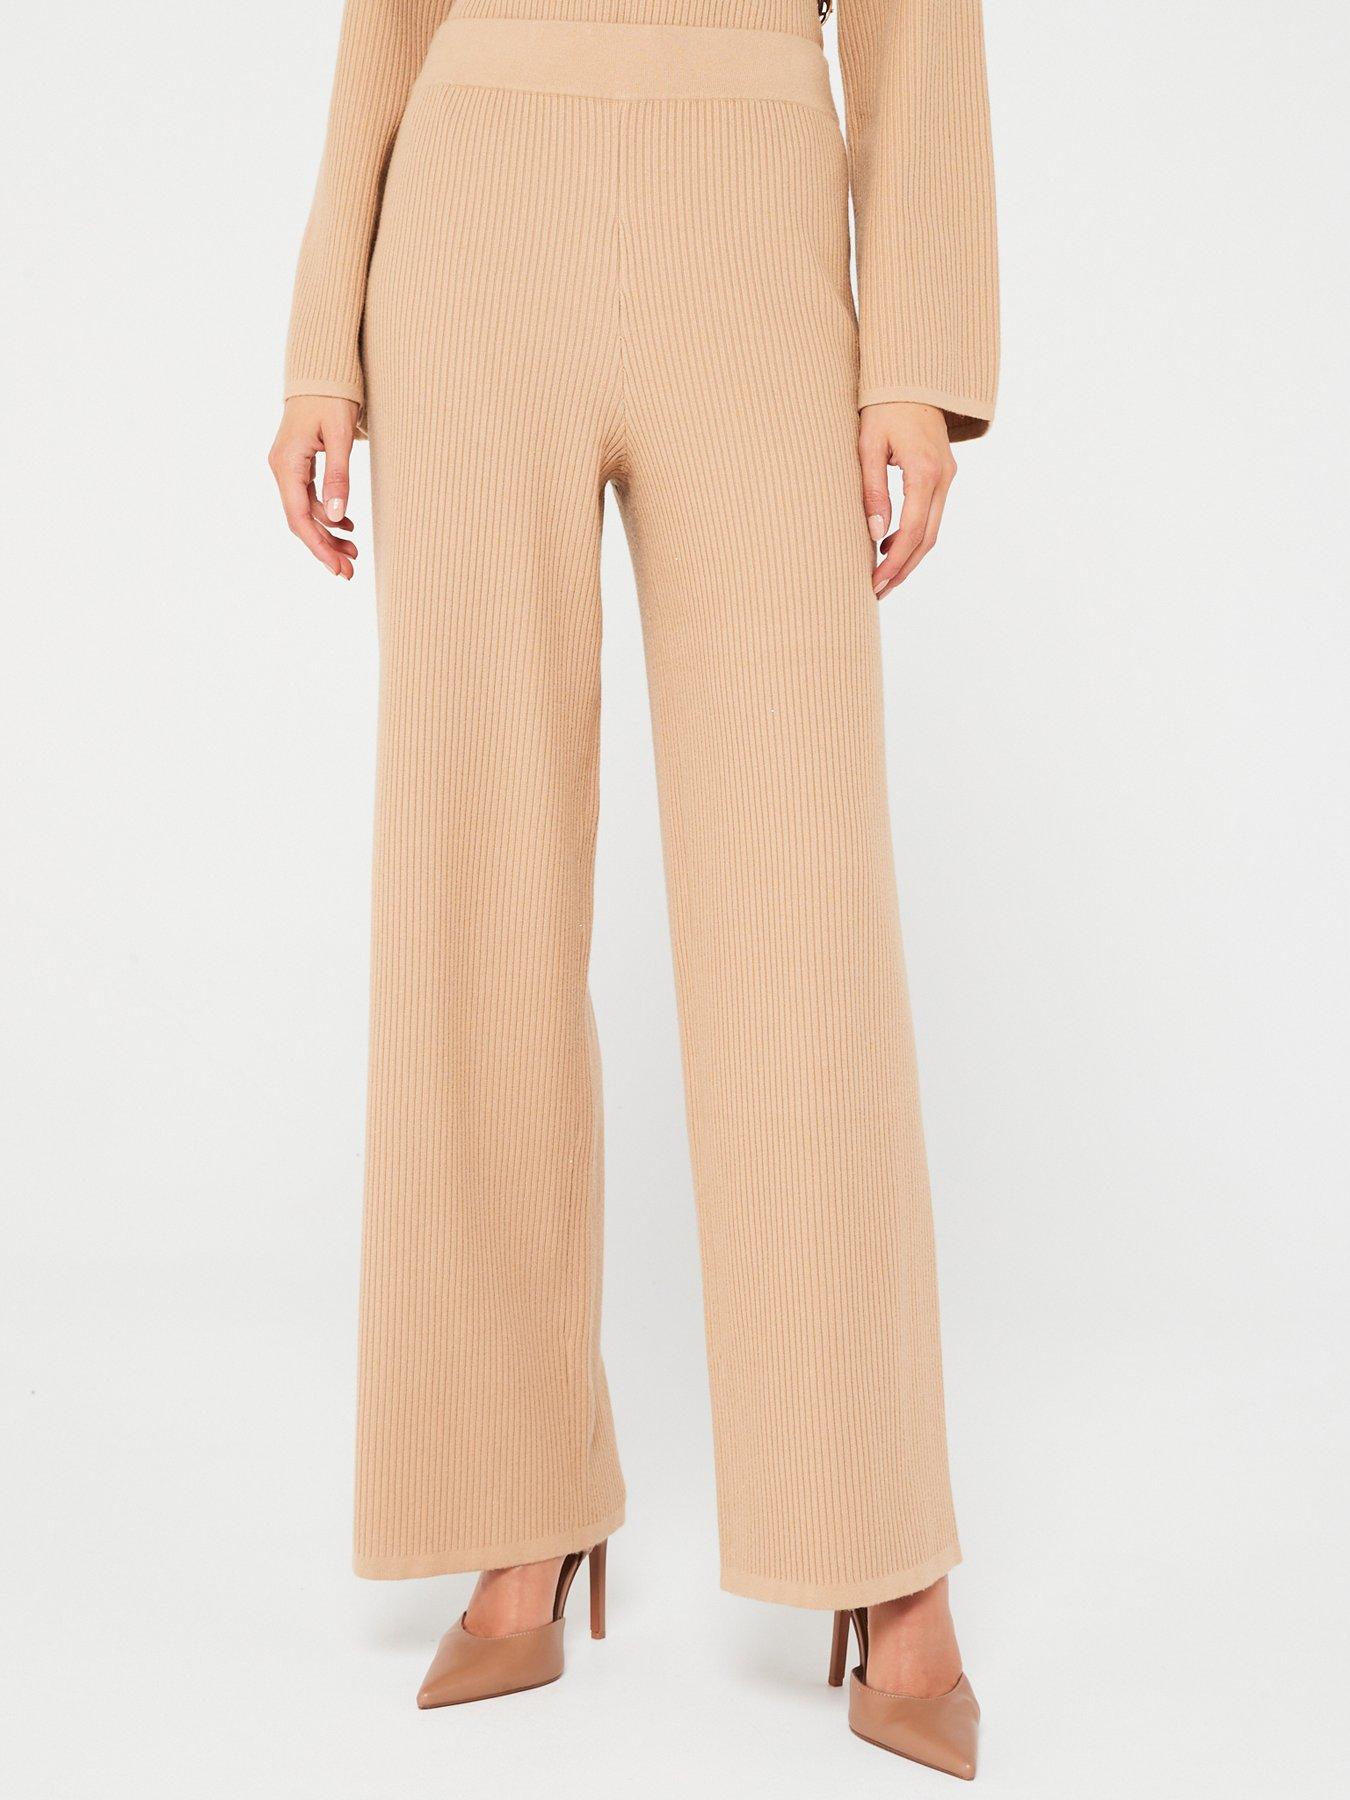 Pretty Lavish wide ribbed knit pants in camel - part of a set